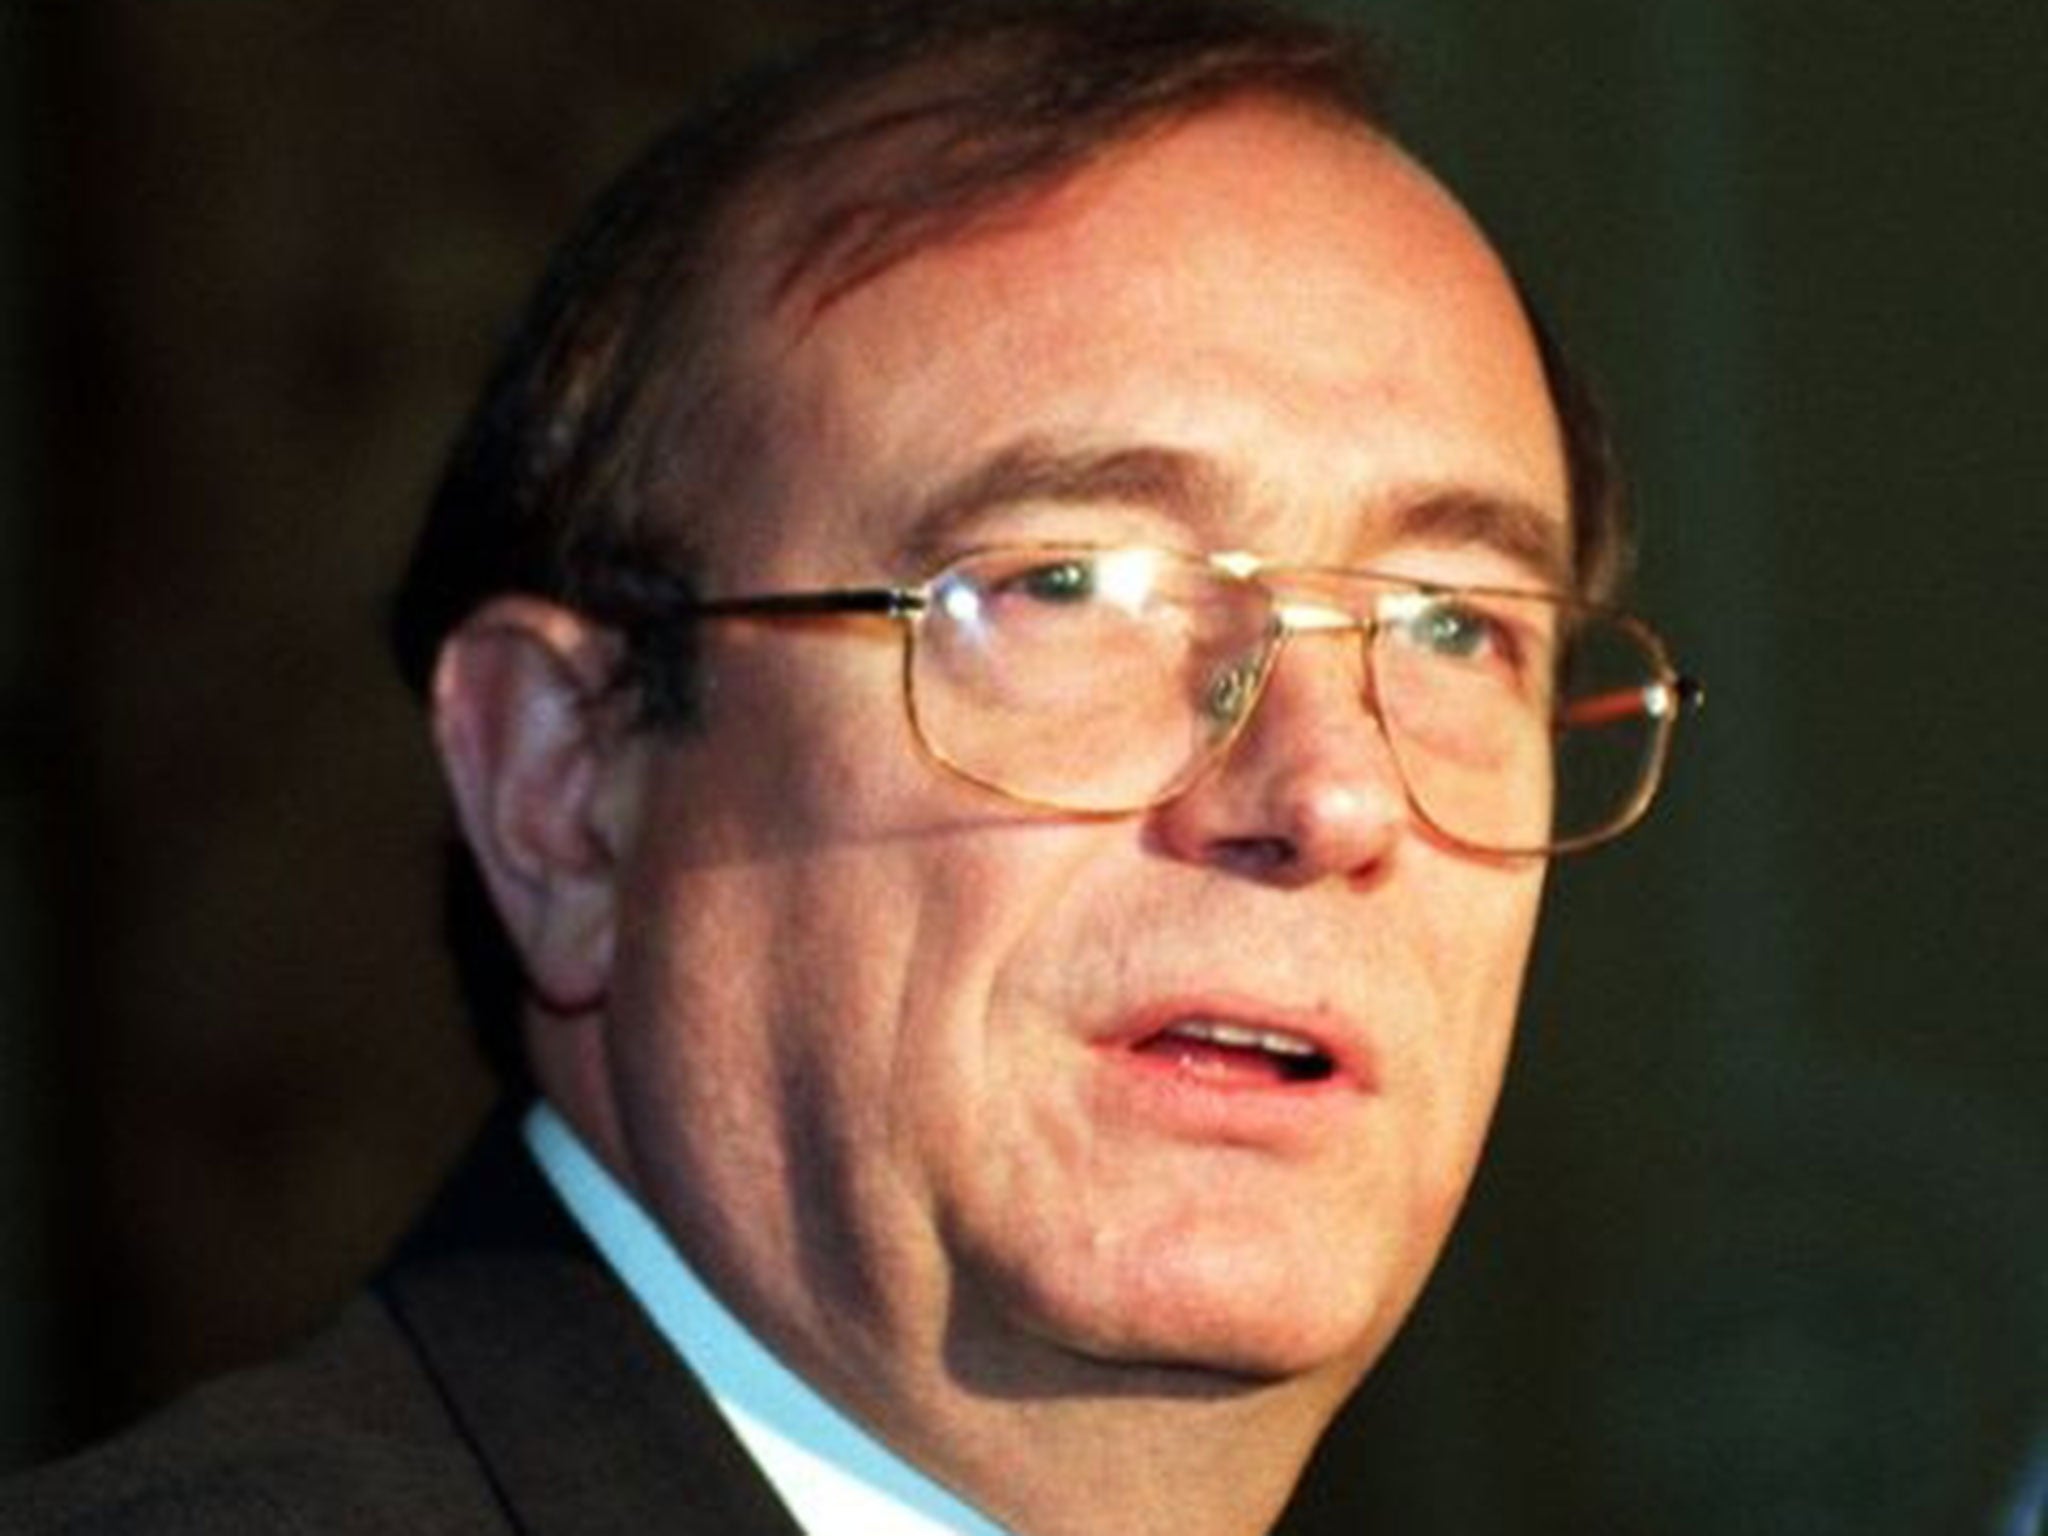 Lord Sewel has resigned as Lords Deputy Speaker after The Sun on Sunday published video of him allegedly taking drugs with sex workers